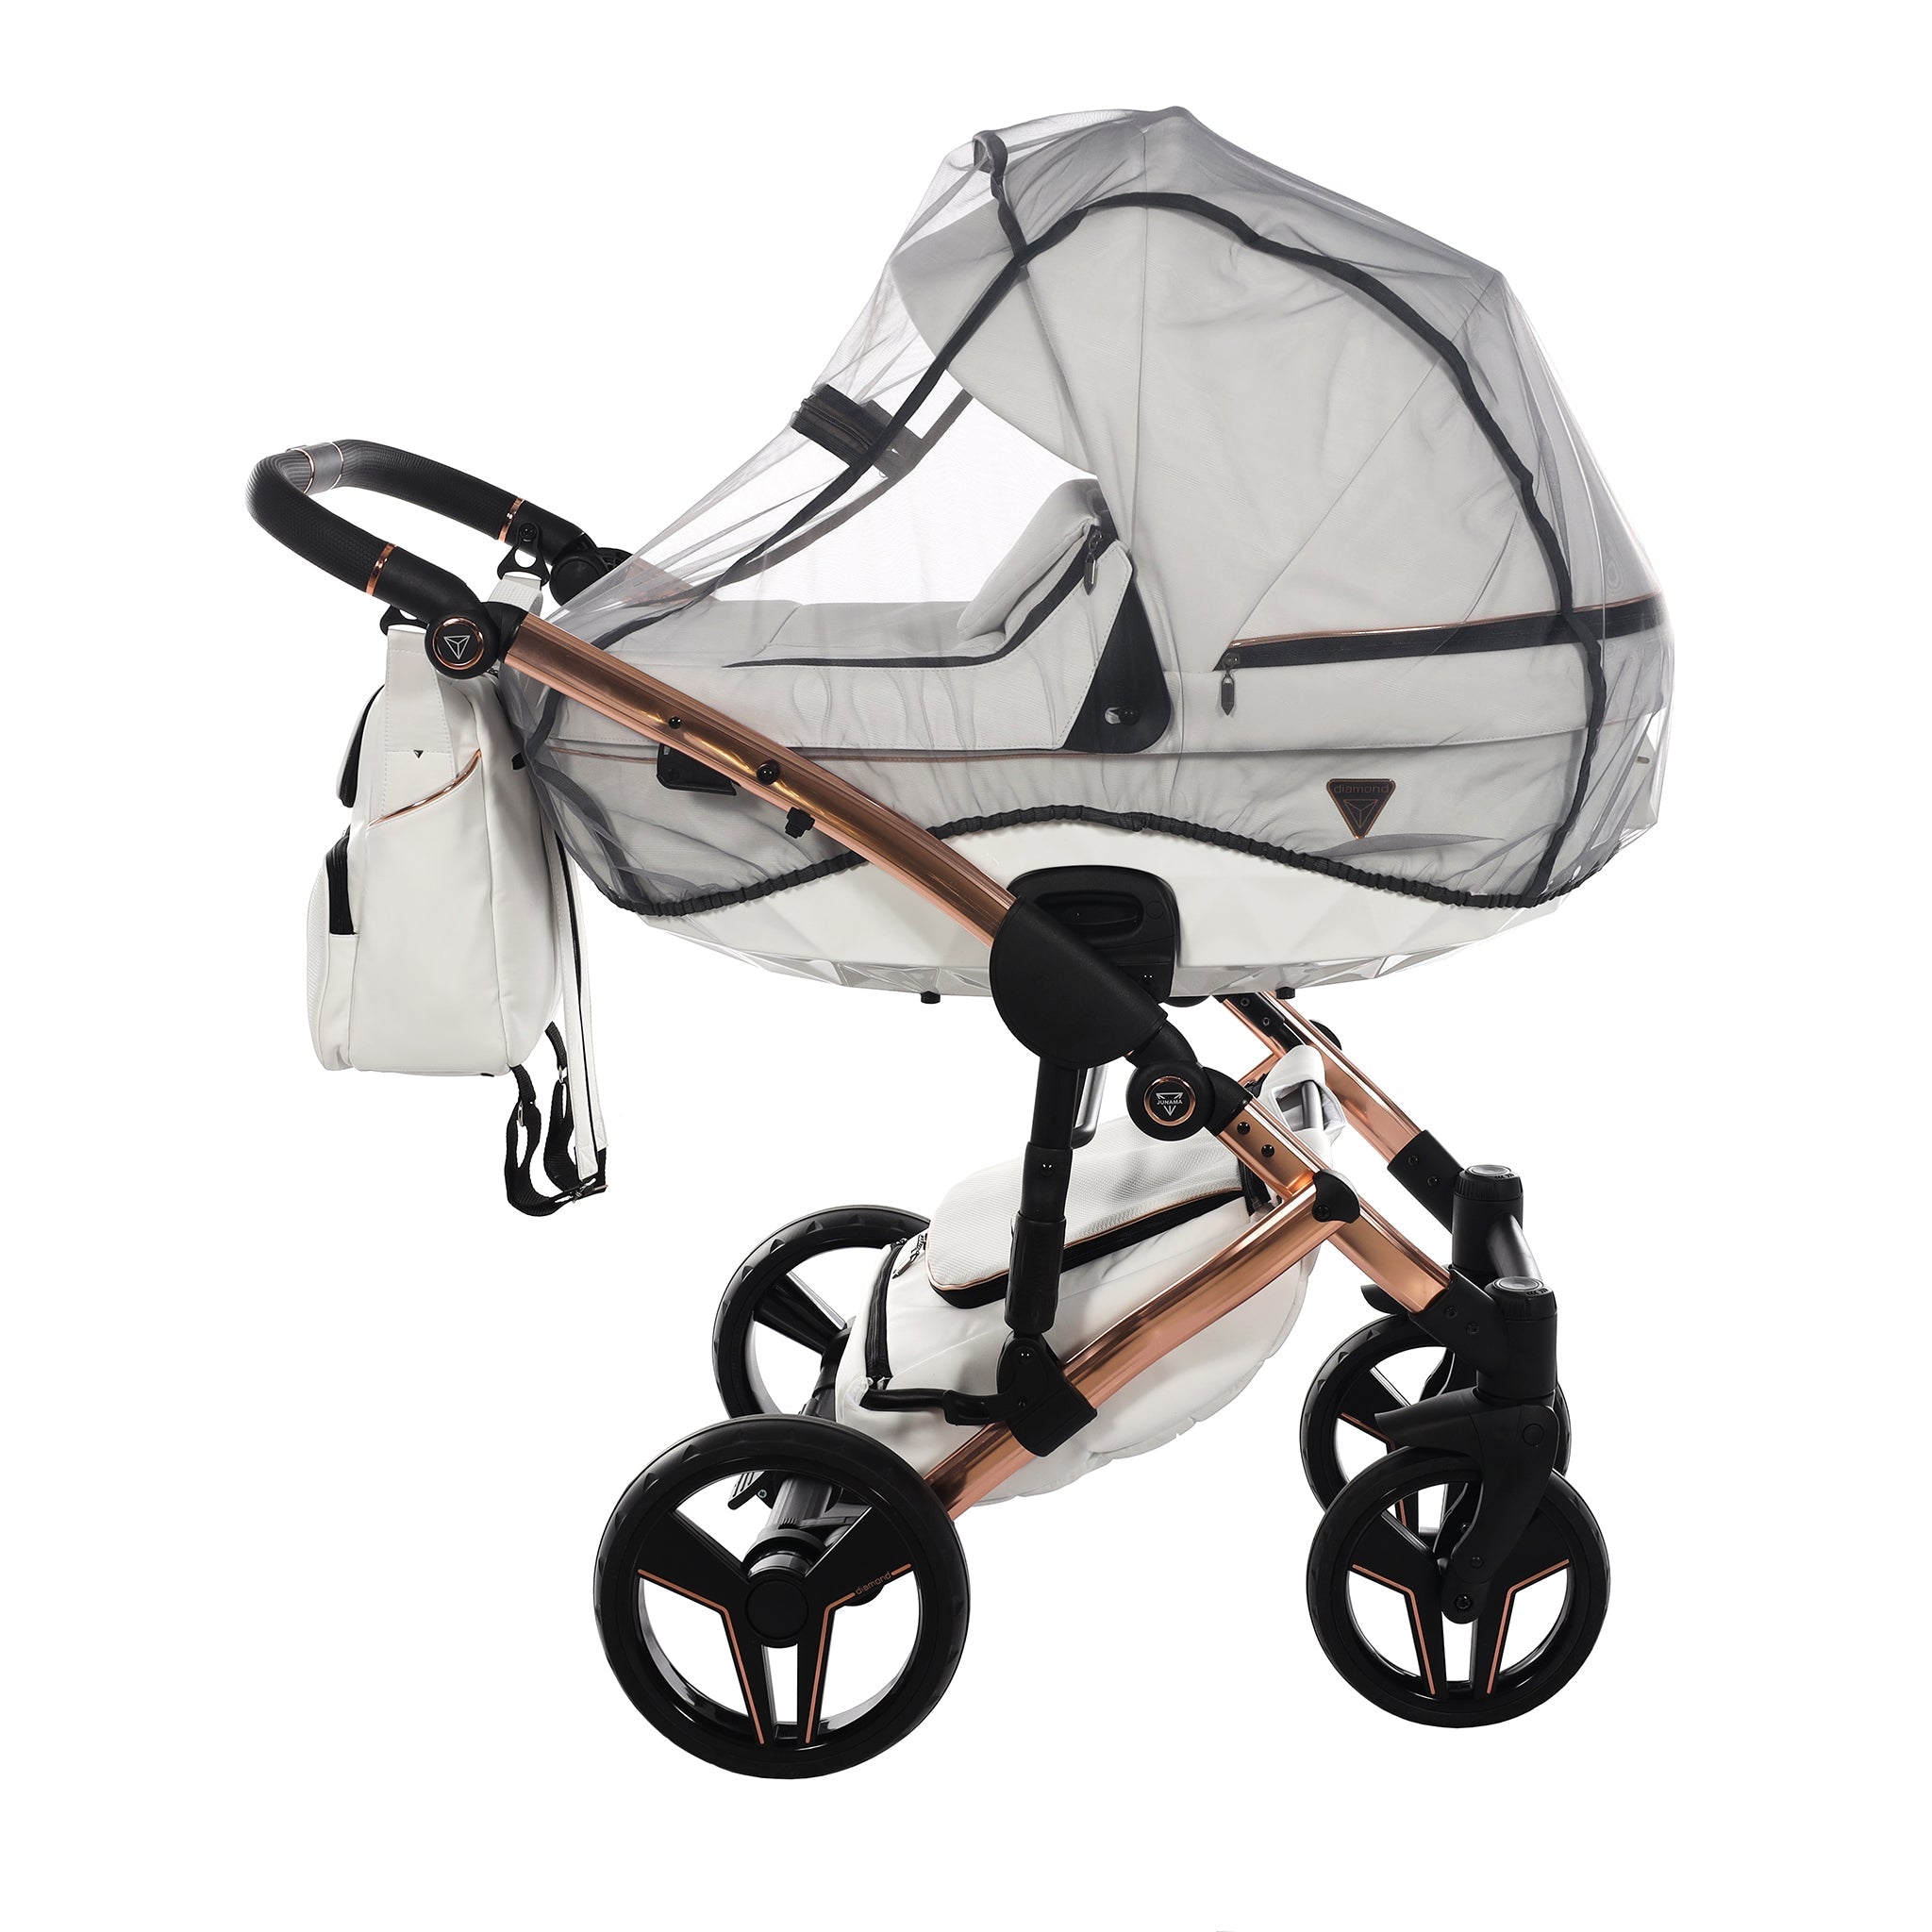 Junama S Class, baby prams or stroller 2 in 1 - Copper and white, Code number: JUNSC01